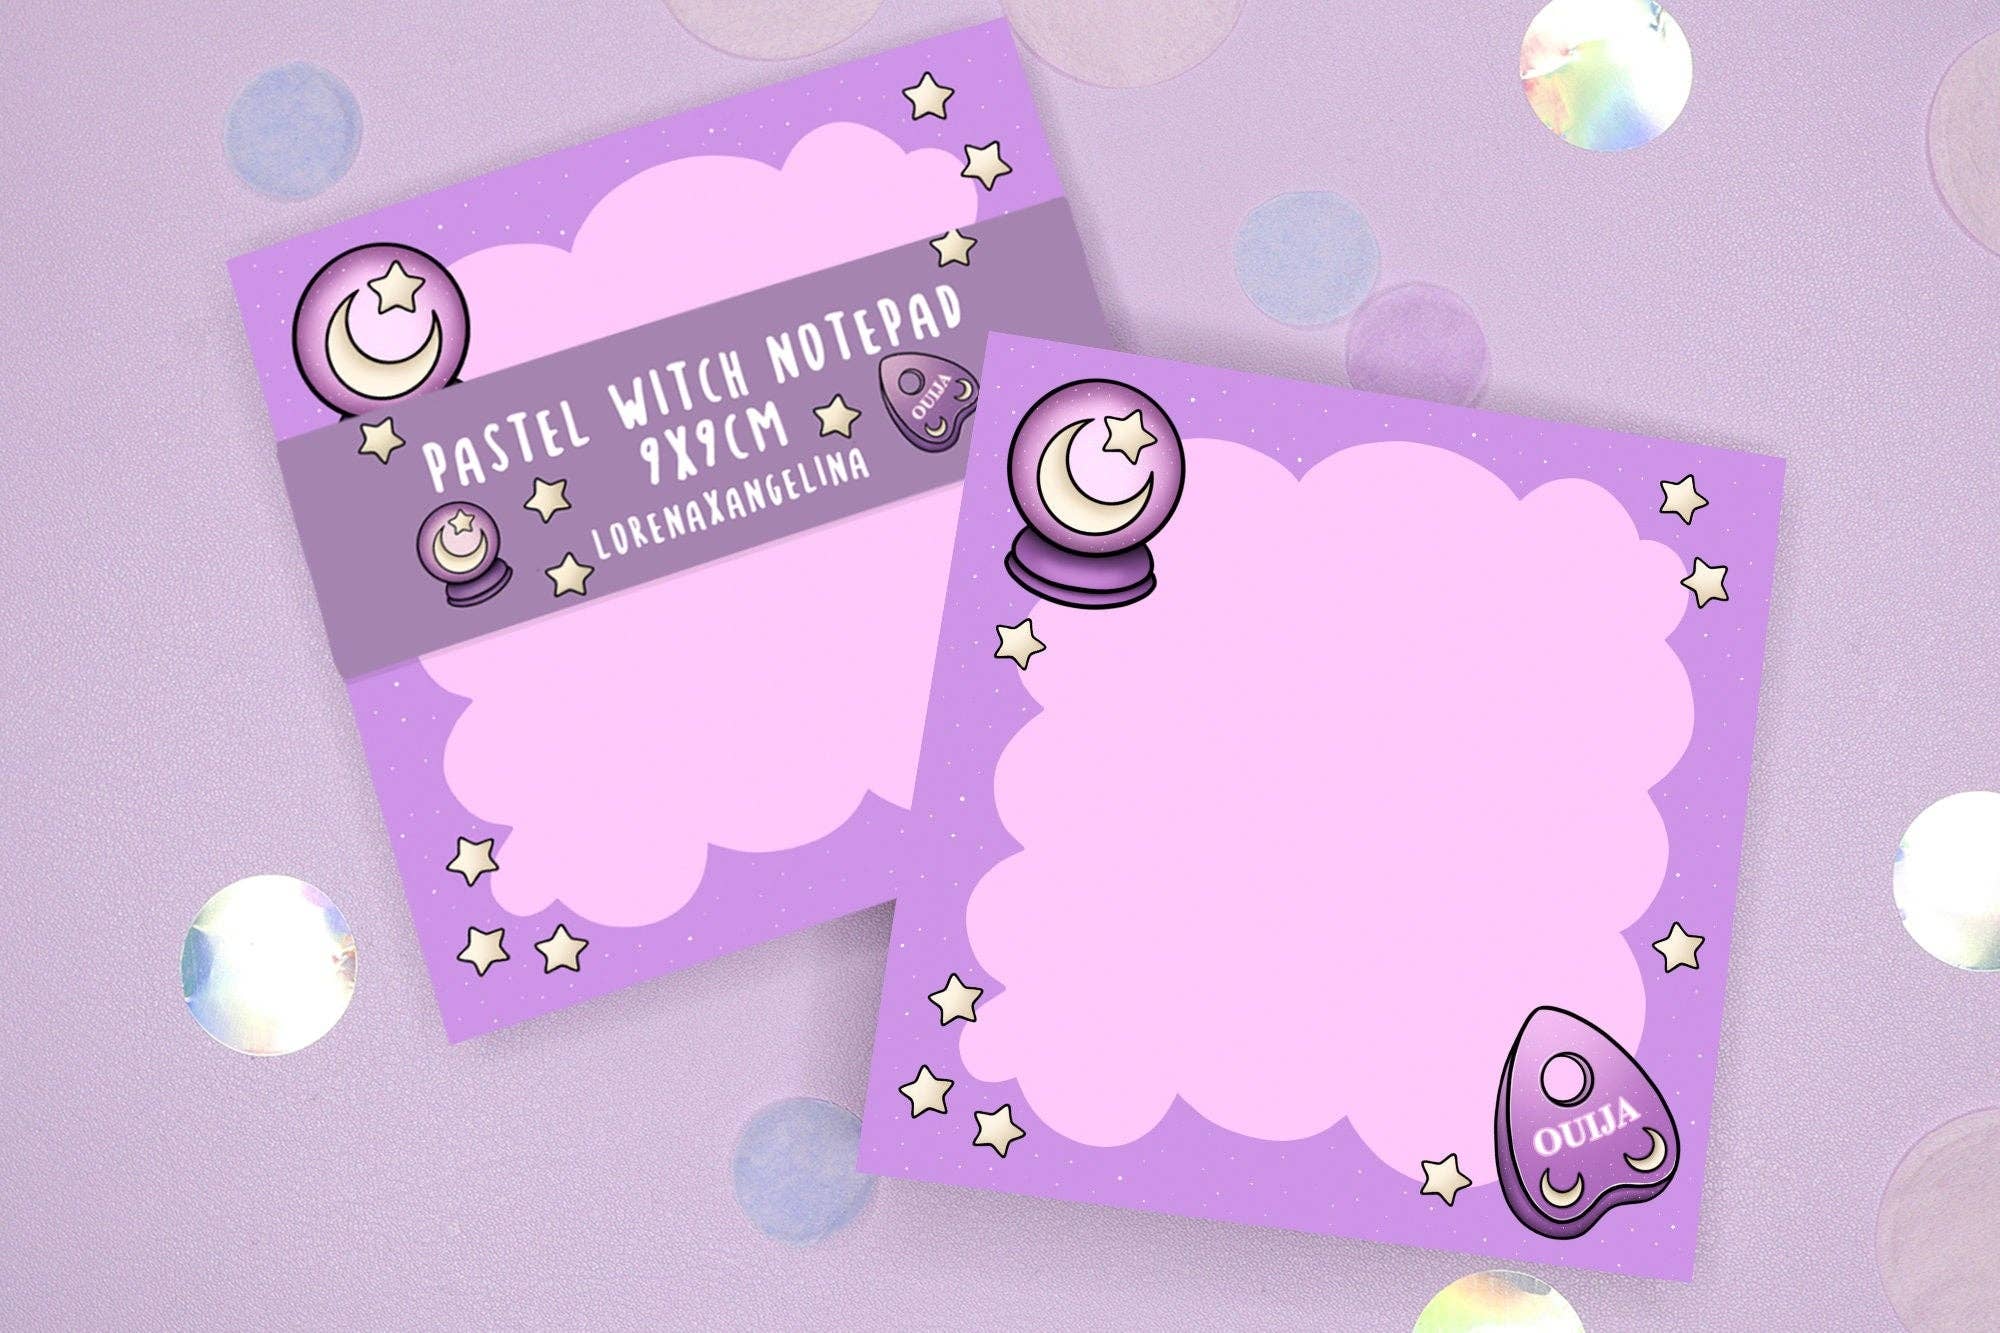 Pastel Witch Mini Notepad / Witchy Wicca Kawaii